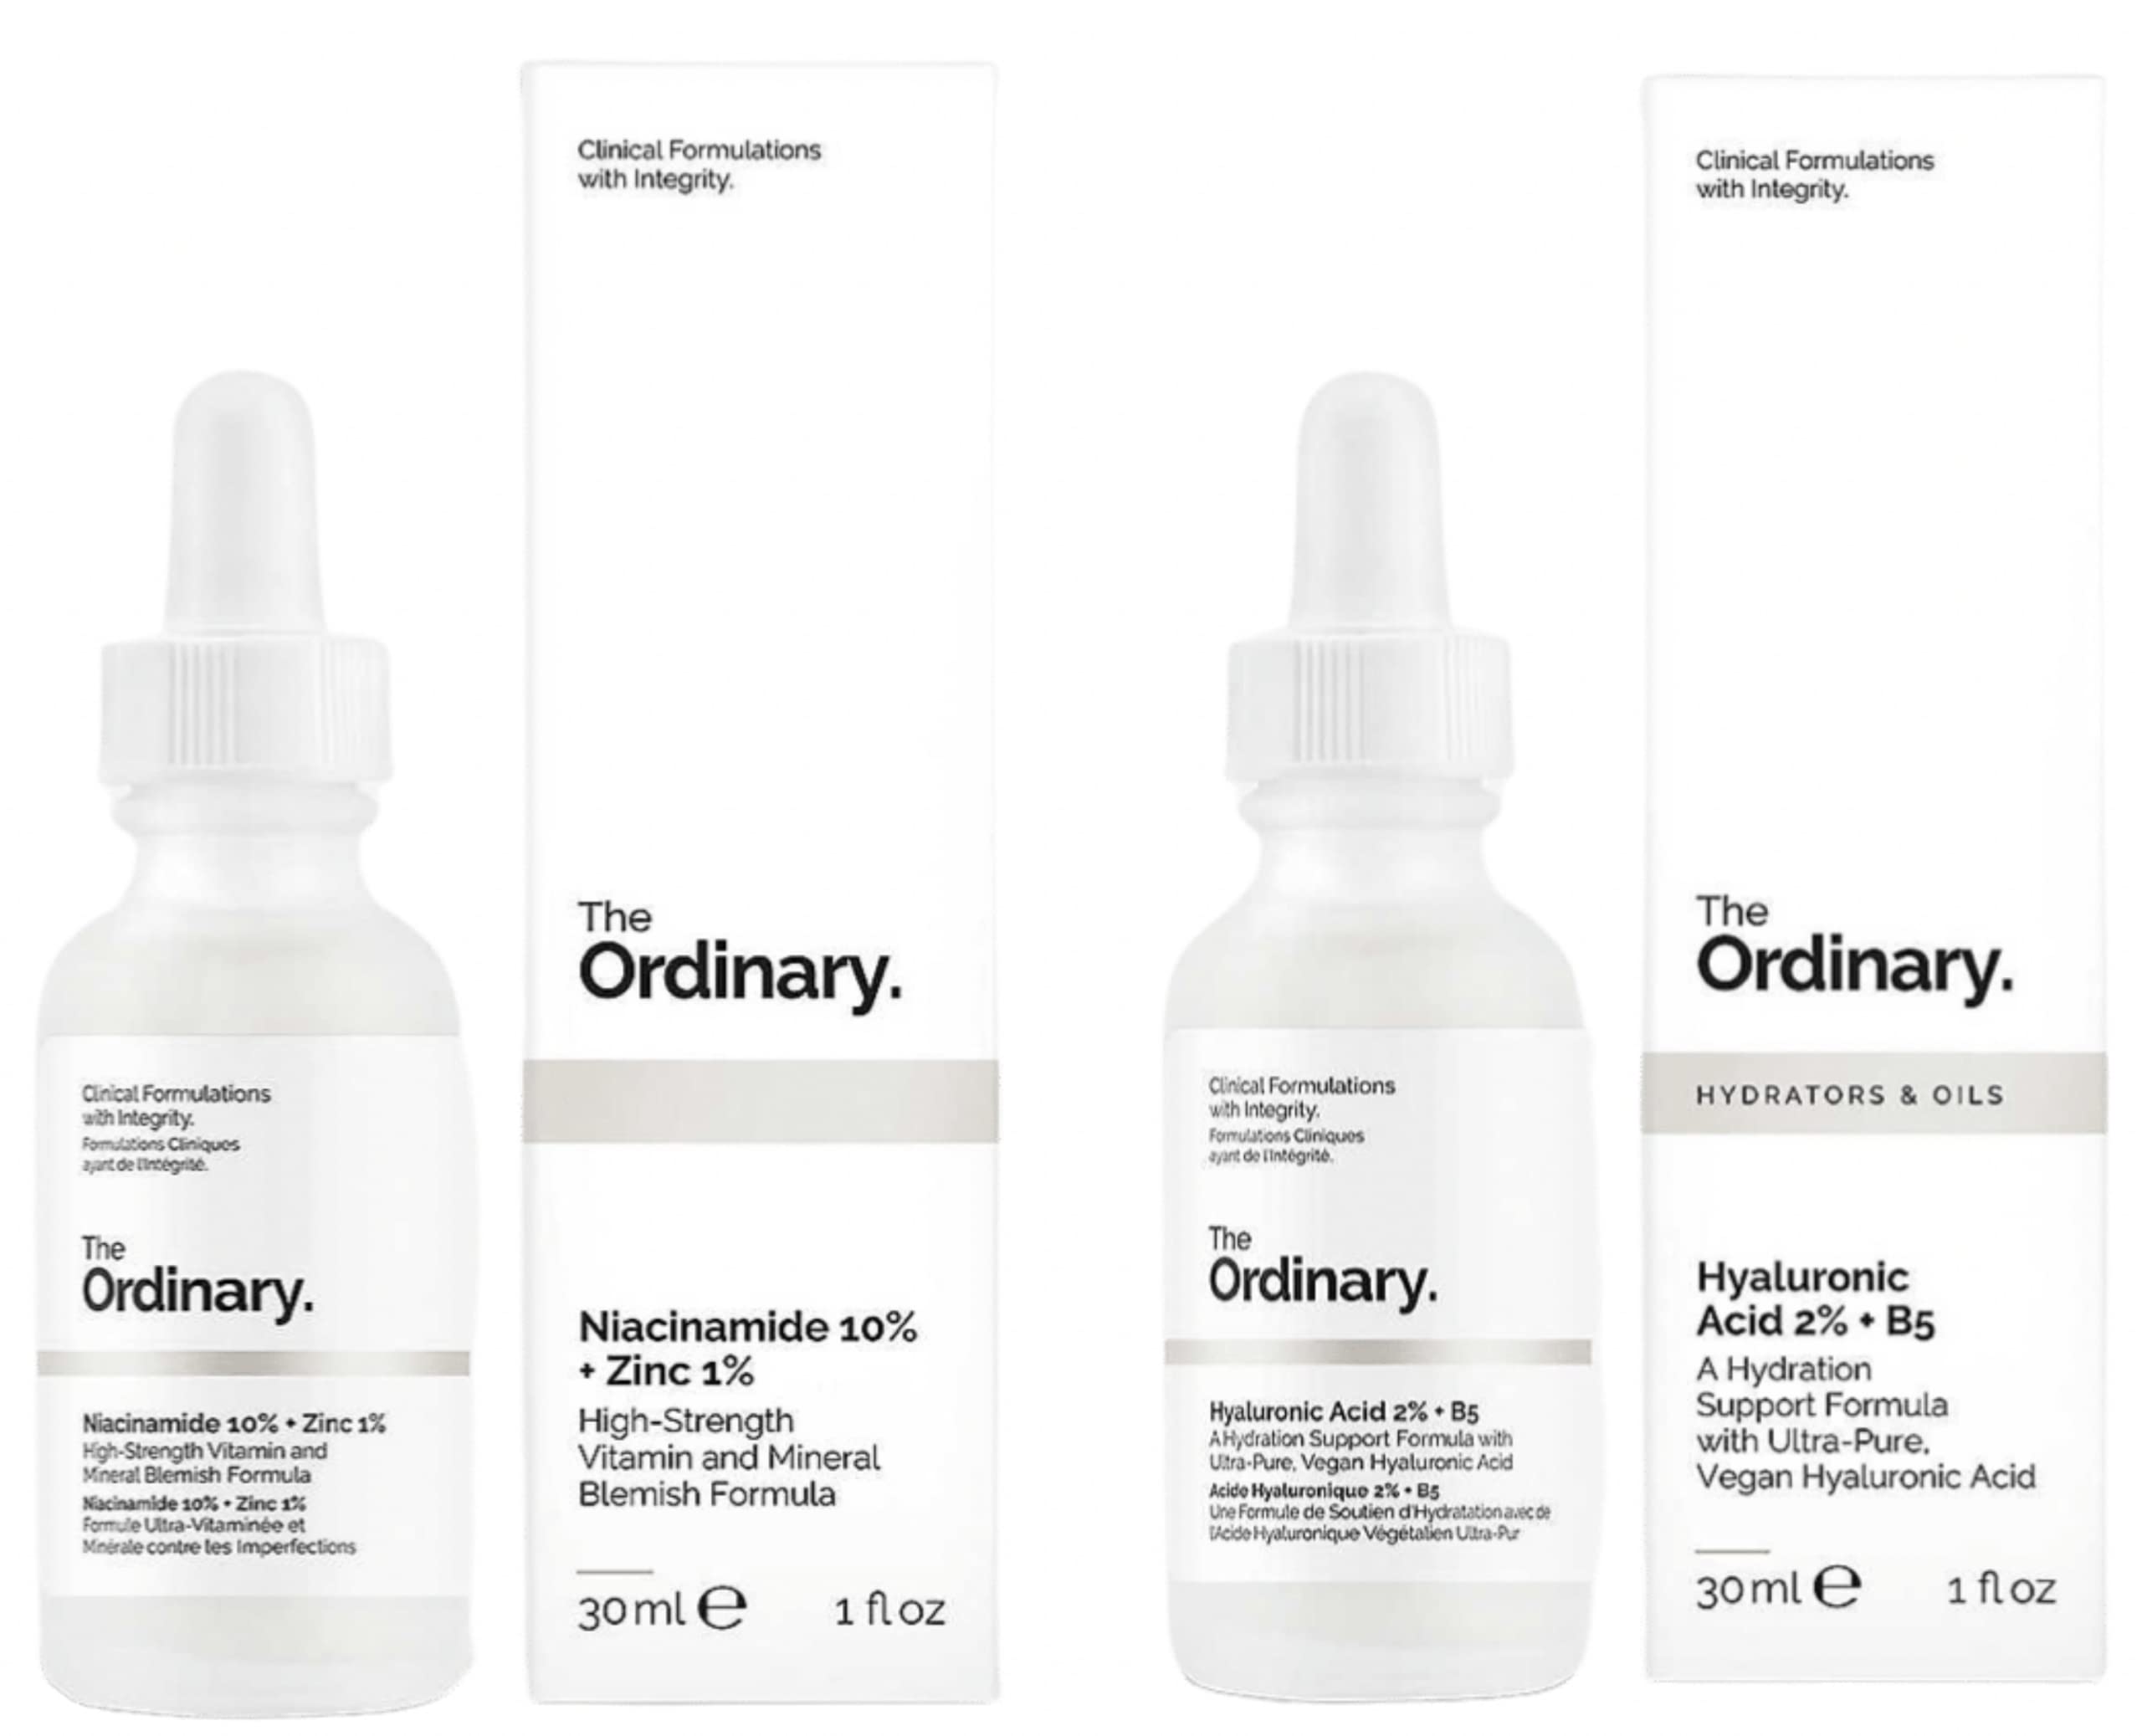 The Ordinary Hyaluronic Acid with 2% + B5 (30ml) and Niacinamide 10% + Zinc 1% (30ml) Bundle Face Care Set